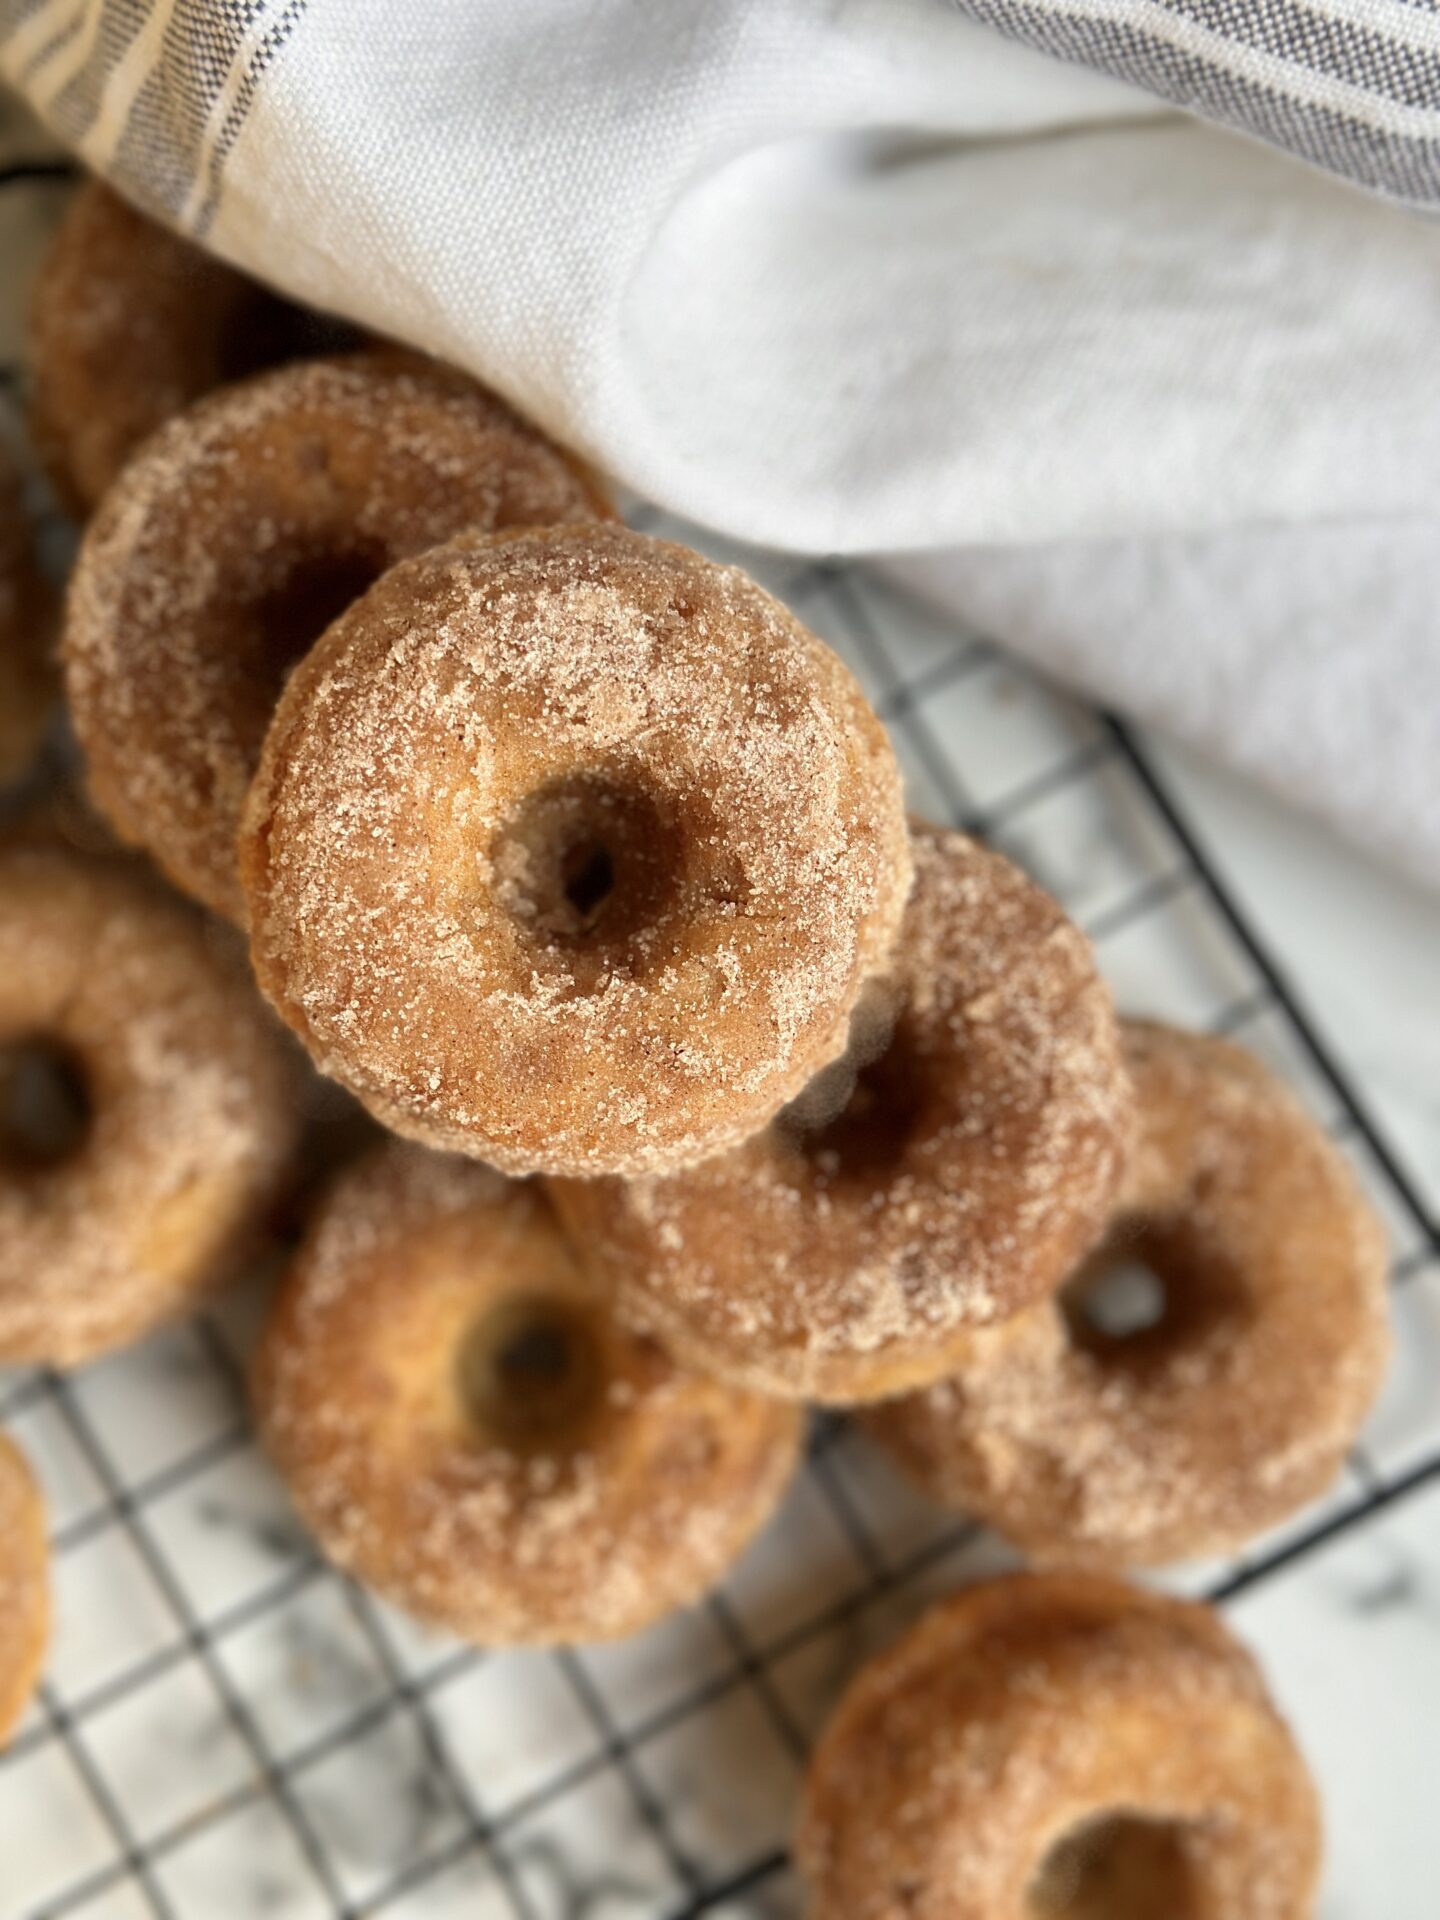 A stack of freshly baked Cinnamon Sugar donuts on a black wire cooling rack is seen from above